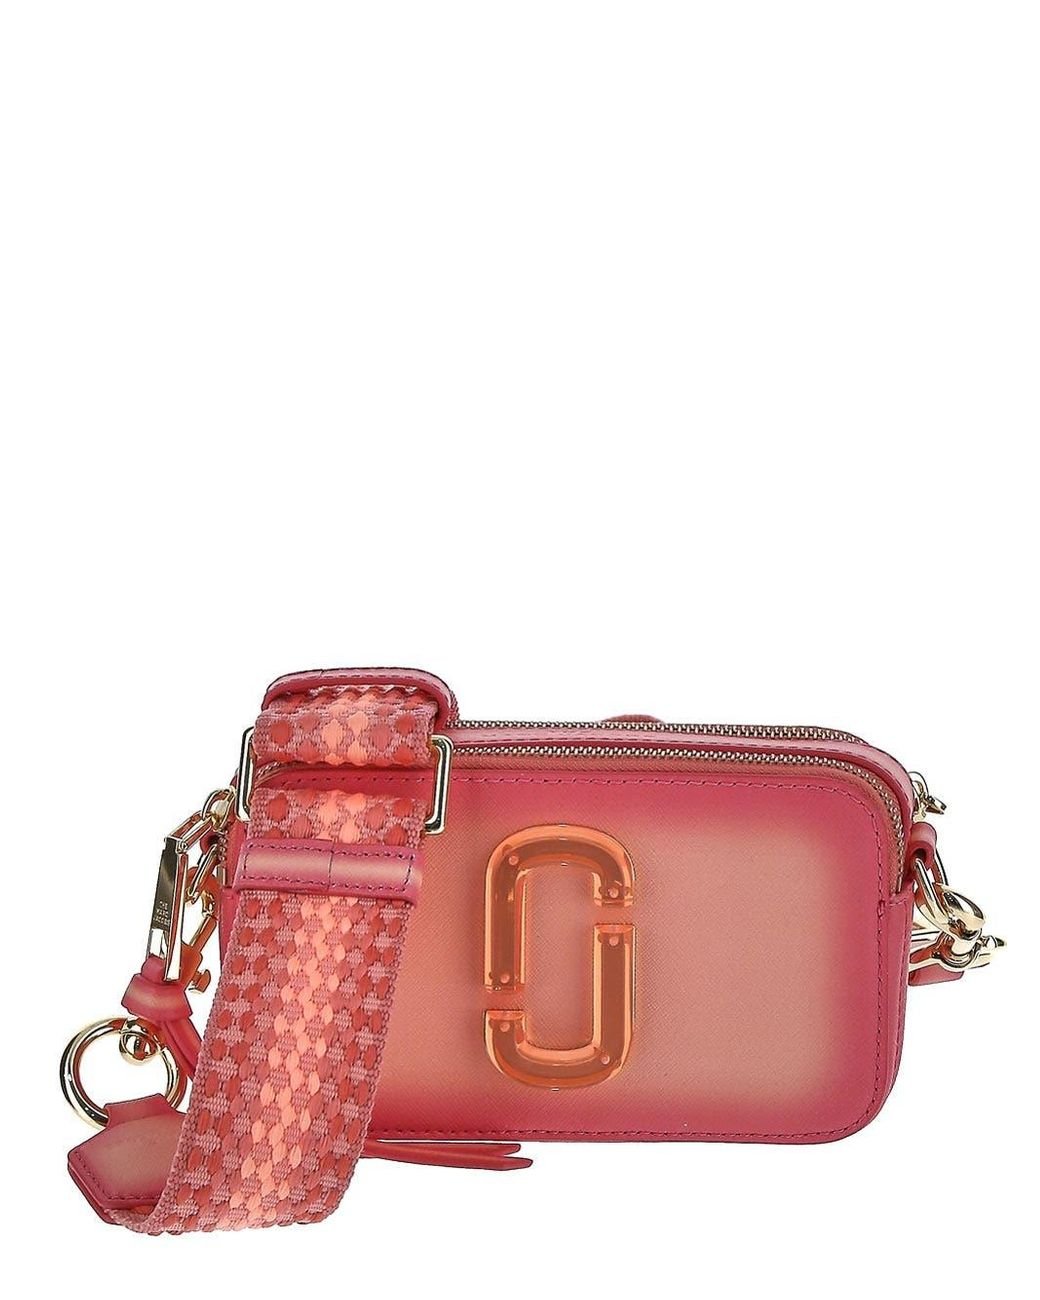 Marc Jacobs The Fluoro Edge Snapshot Bag in Pink